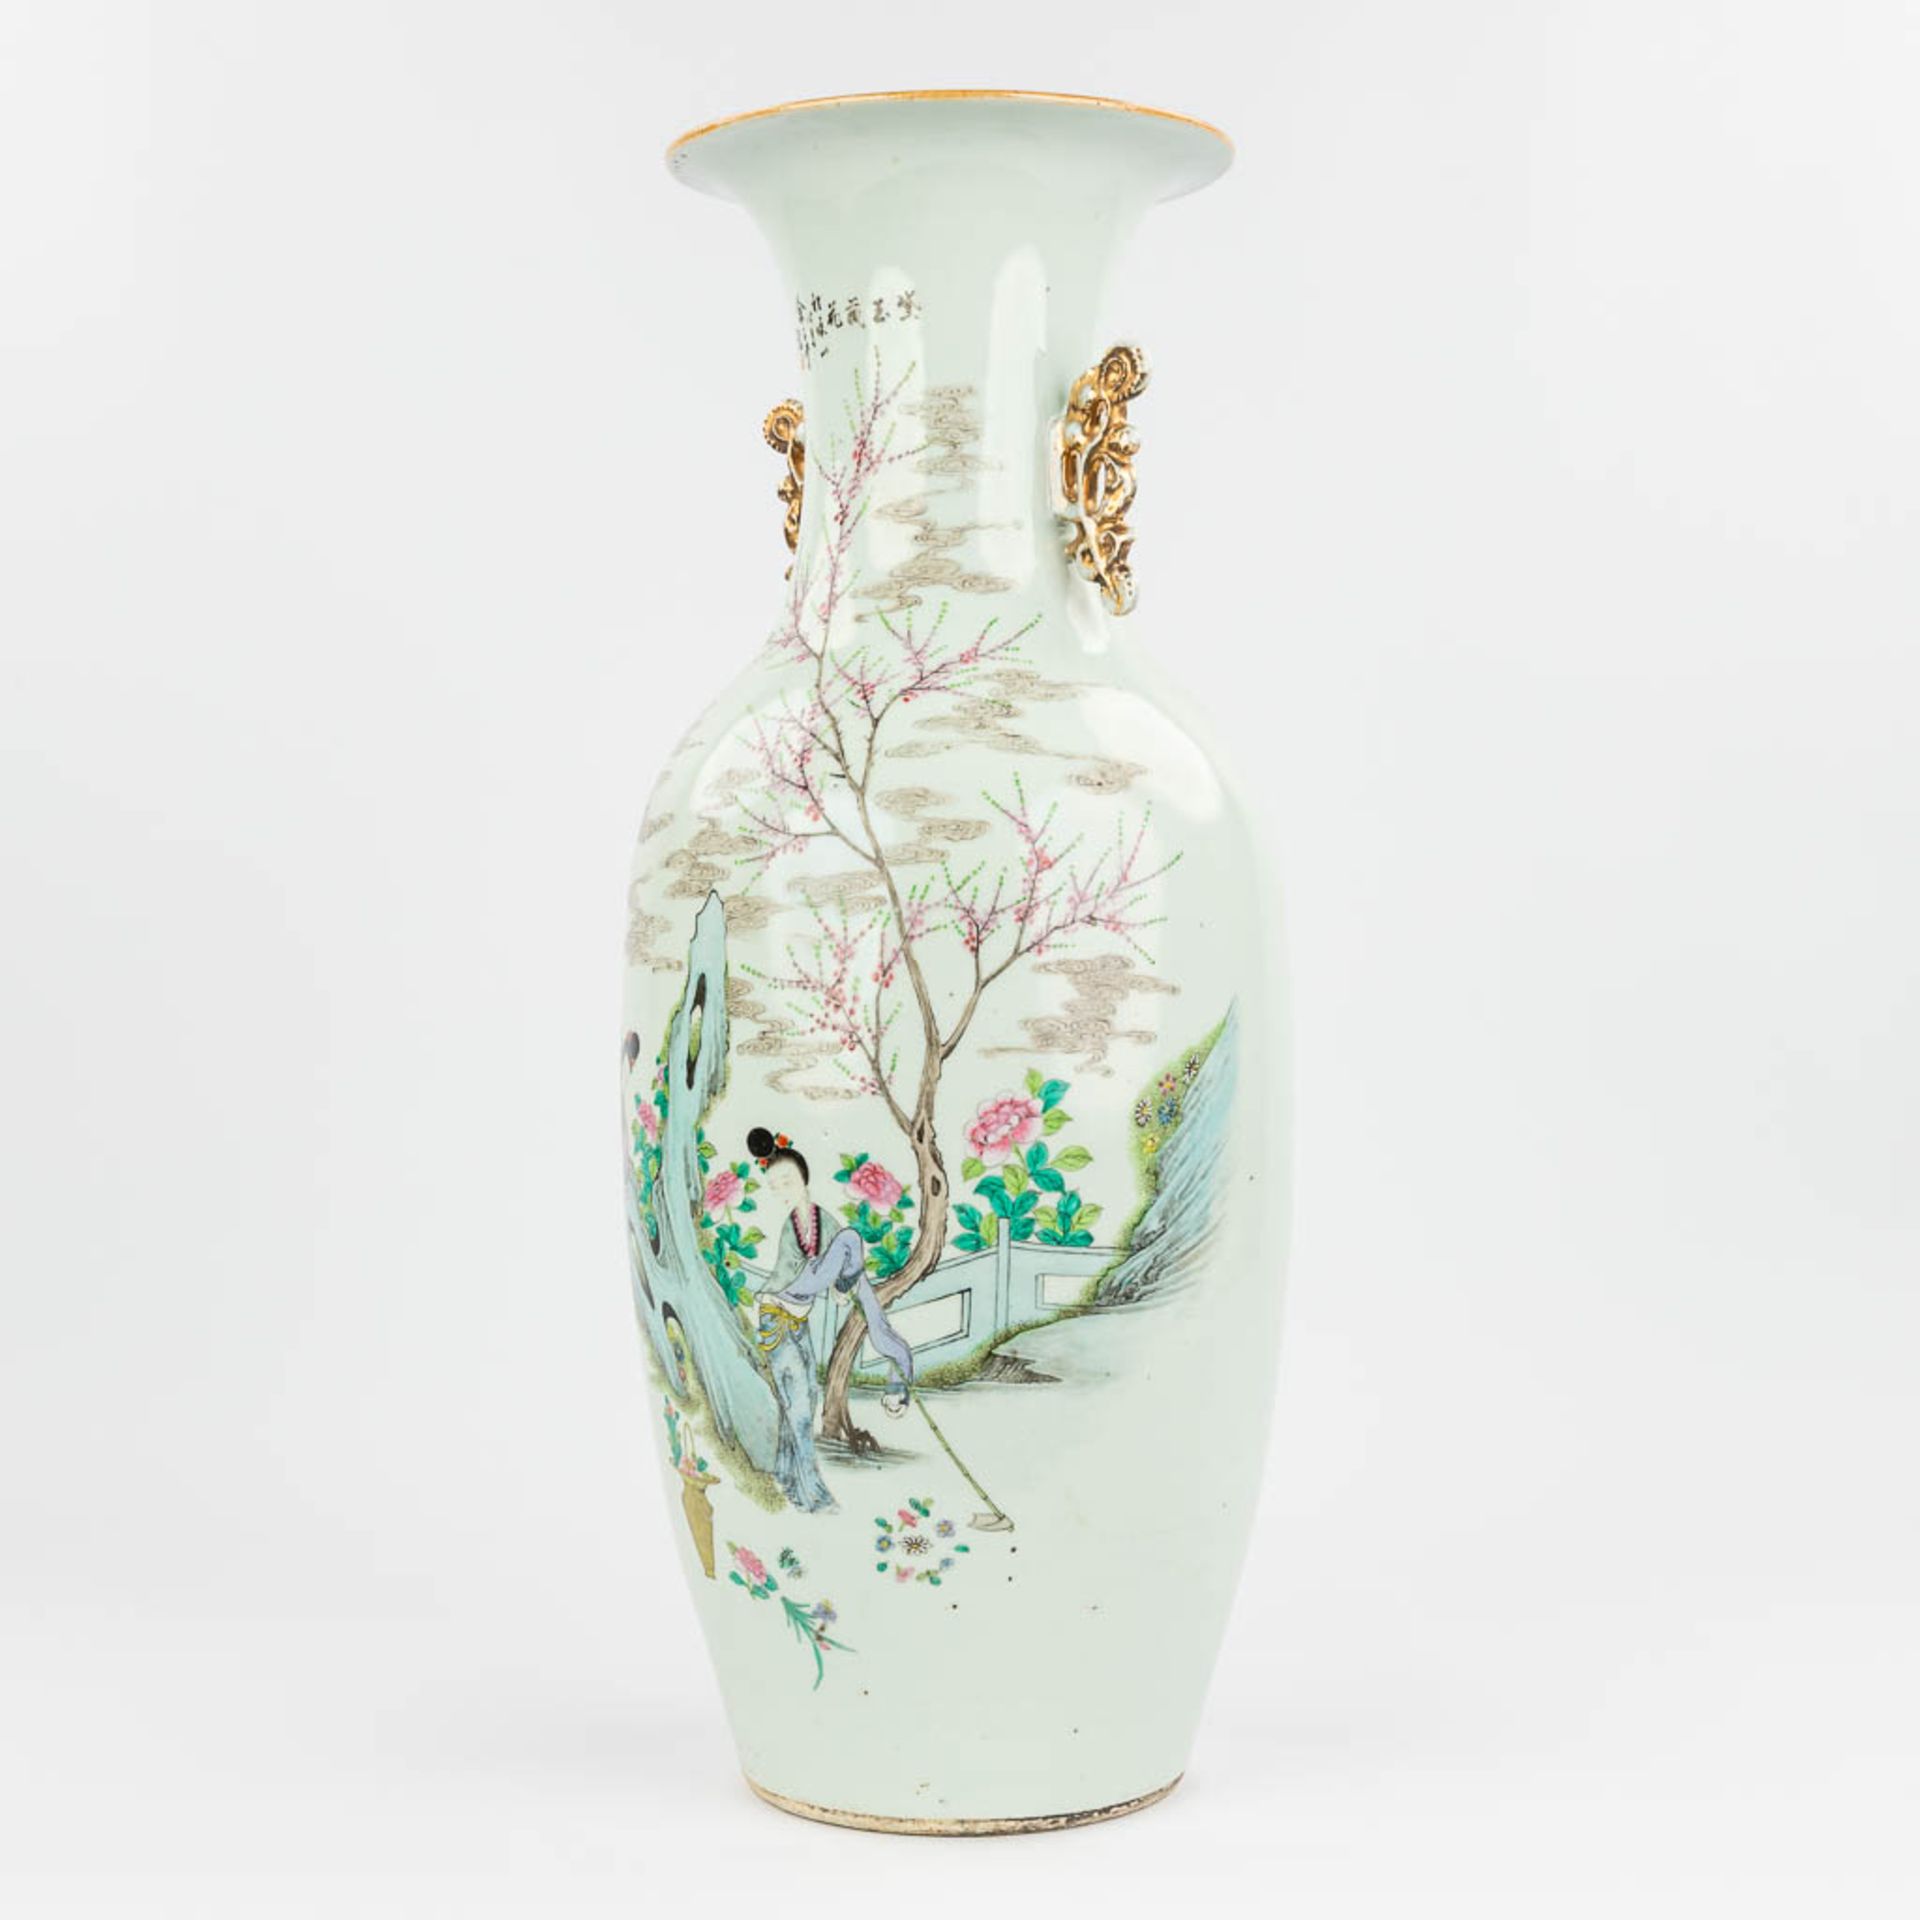 A Chinese vase made of porcelain andÊdecor of ladies near a large rock. (57,5 x 23 cm) - Image 12 of 13